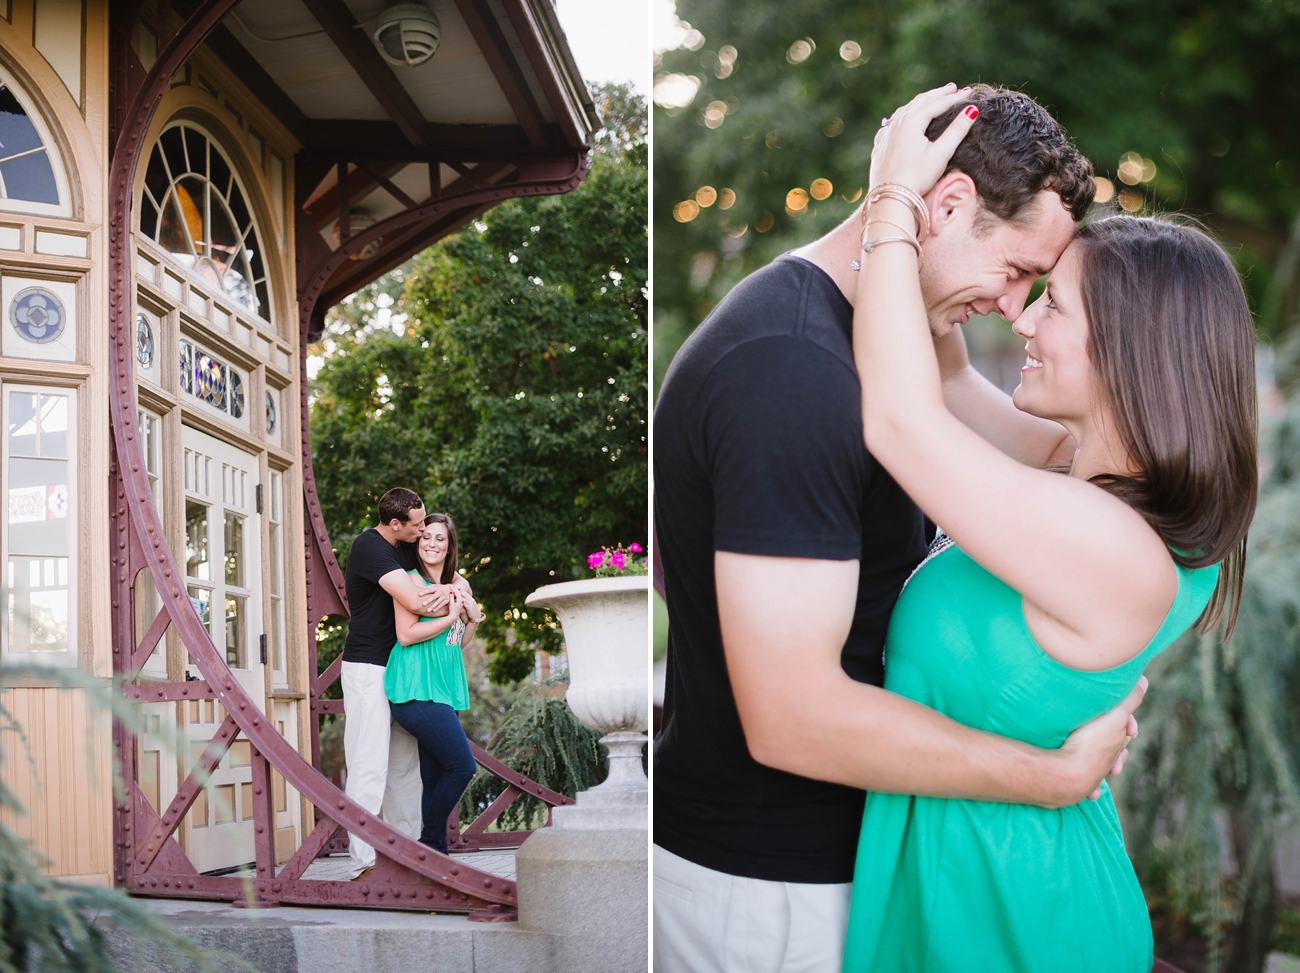 Patterson Park Engagement by Natalie Franke Photography